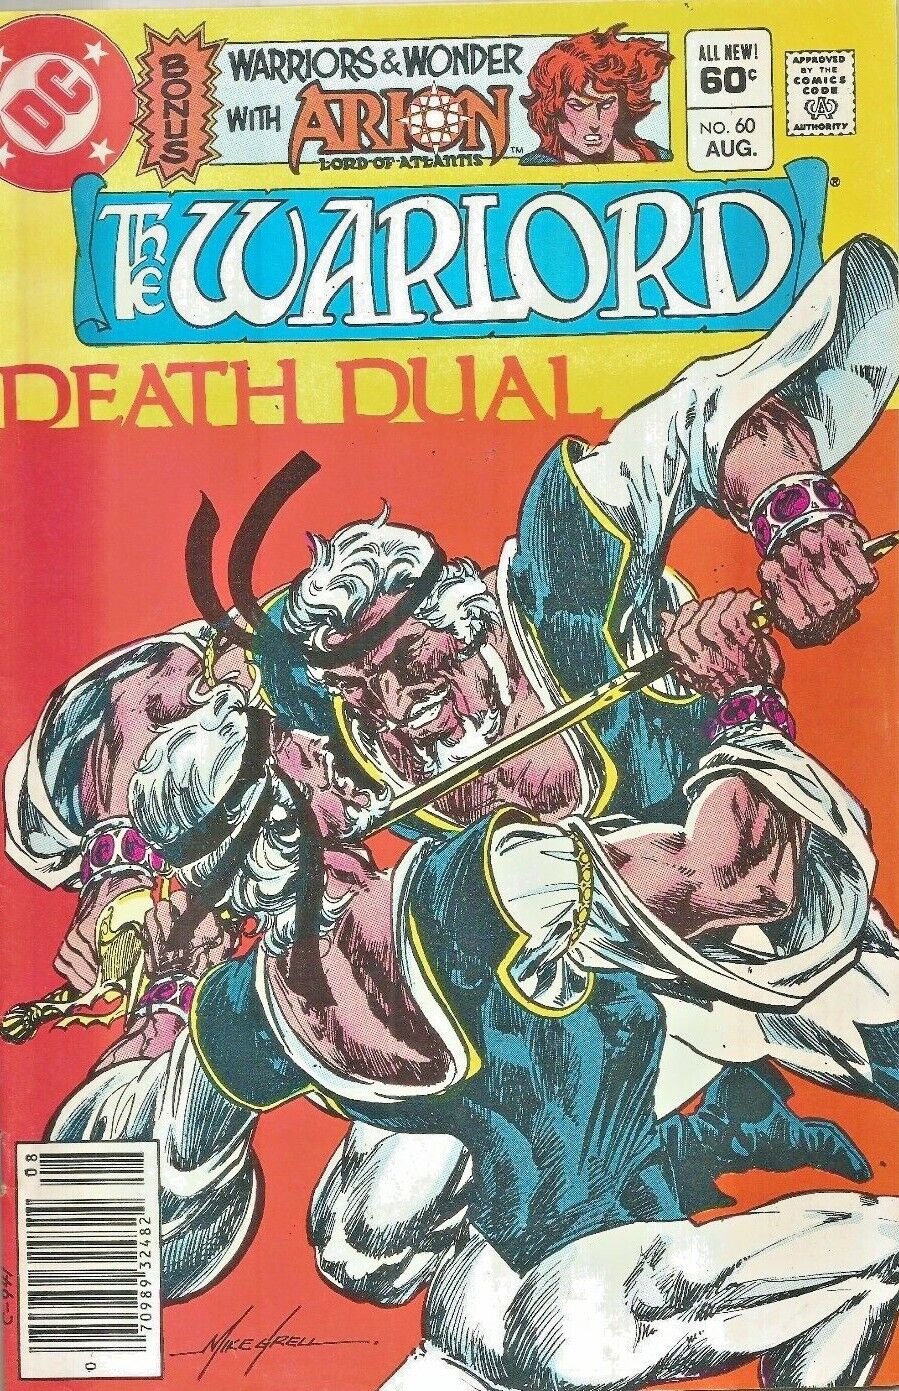 WARLORD #60  NEWSSTAND VARIANT   ARION LORD OF ATLANTIS  DC  1982  NICE!!!